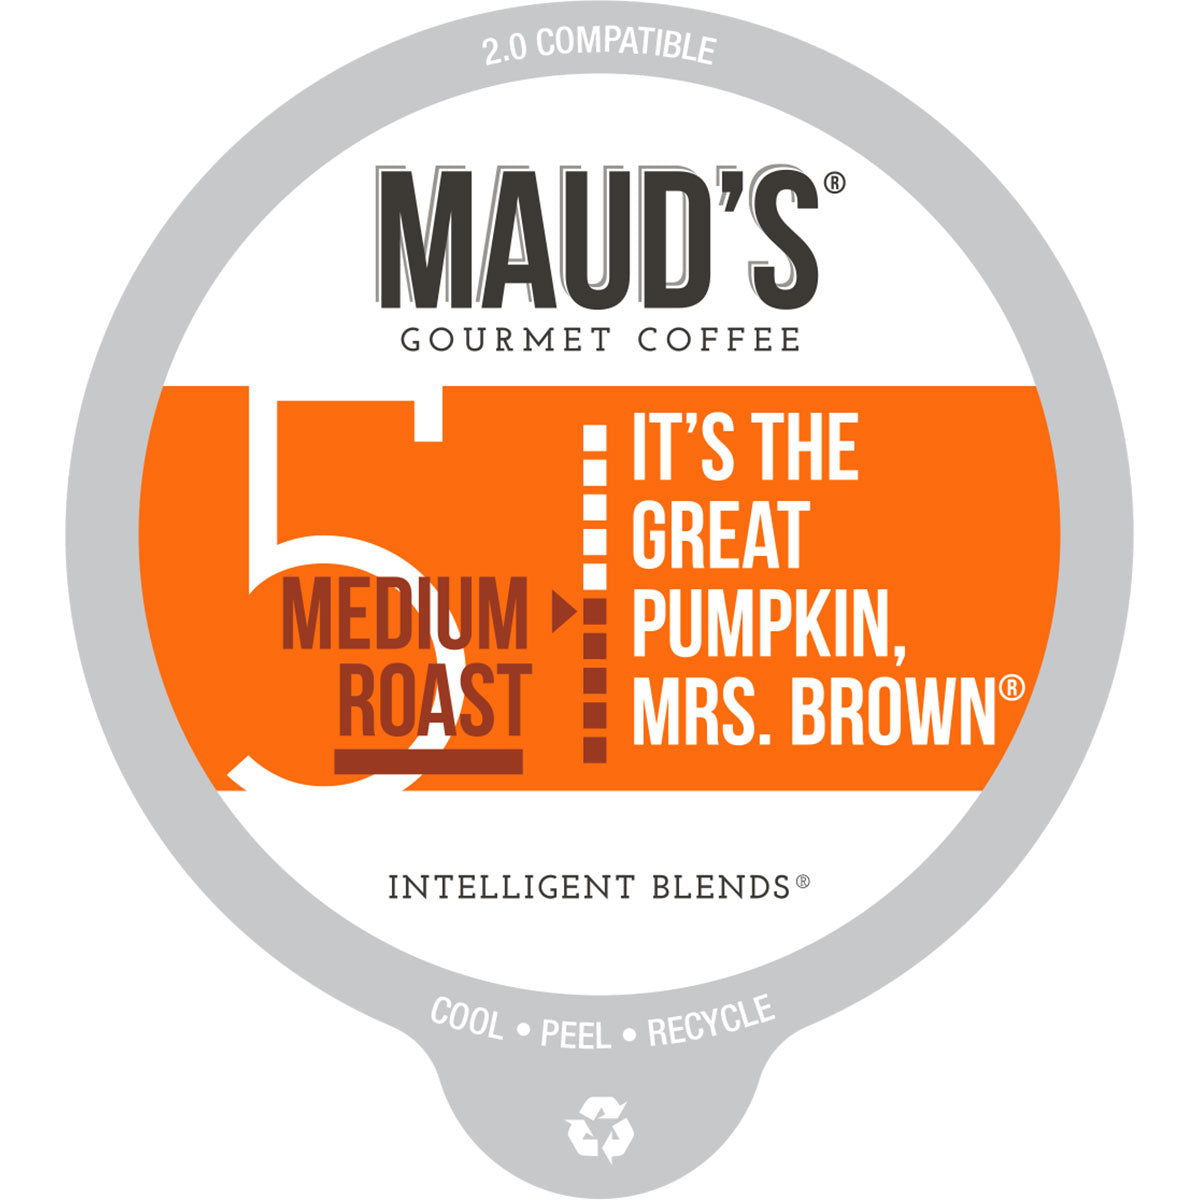 Maud's Pumpkin Spice Flavored Coffee Pods  (It's The Great Pumpkin, Mrs. Brown) - 100ct